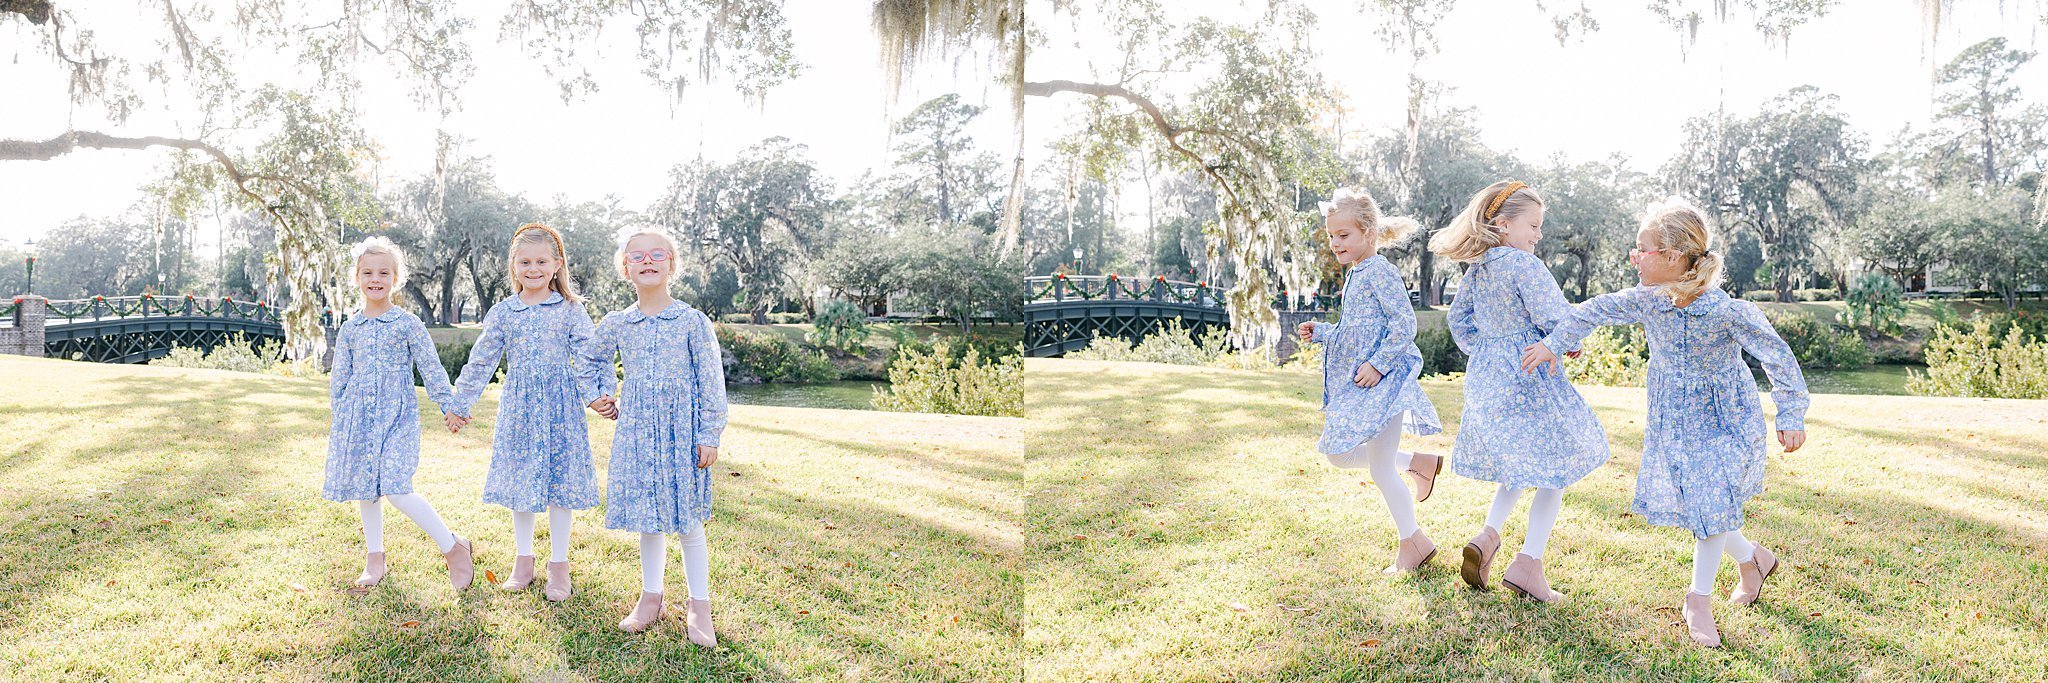 Katherine_Ives_Photography_Harris_Extended_Family_palmetto_bluff_36013.JPG